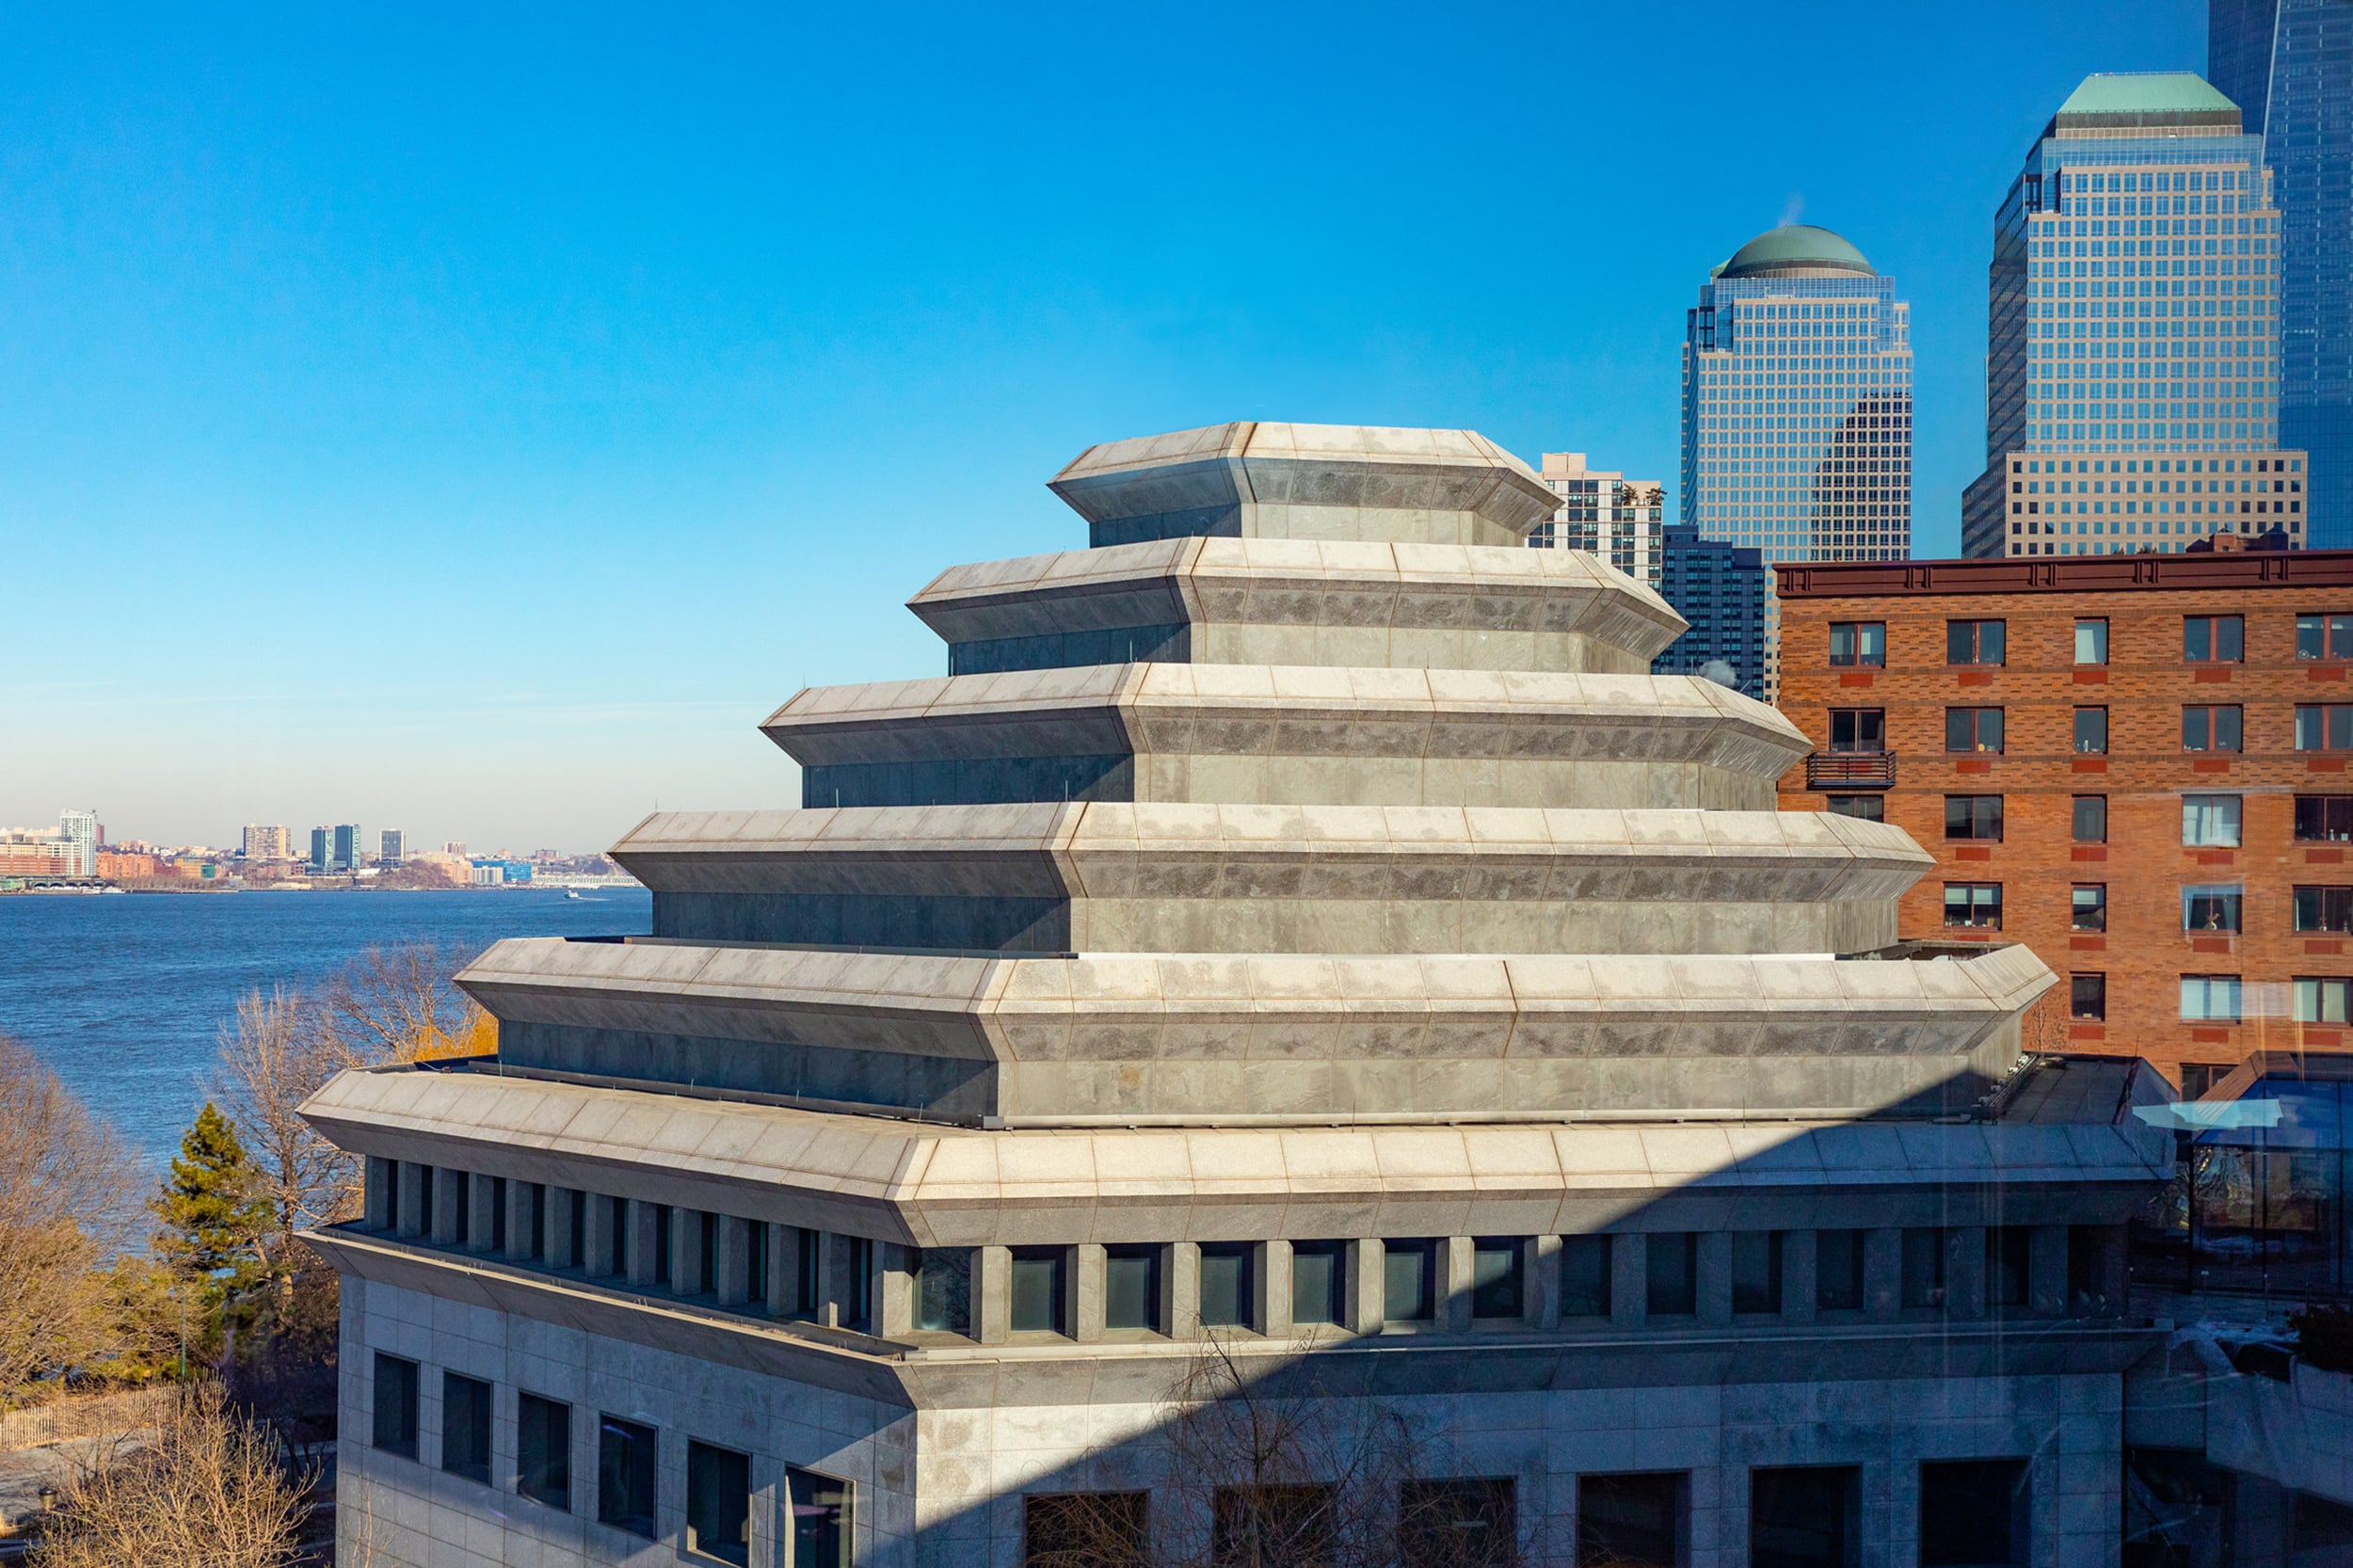 The top of a square building with a pyramid like shape against a blue sky with a river and other buildings in the background.